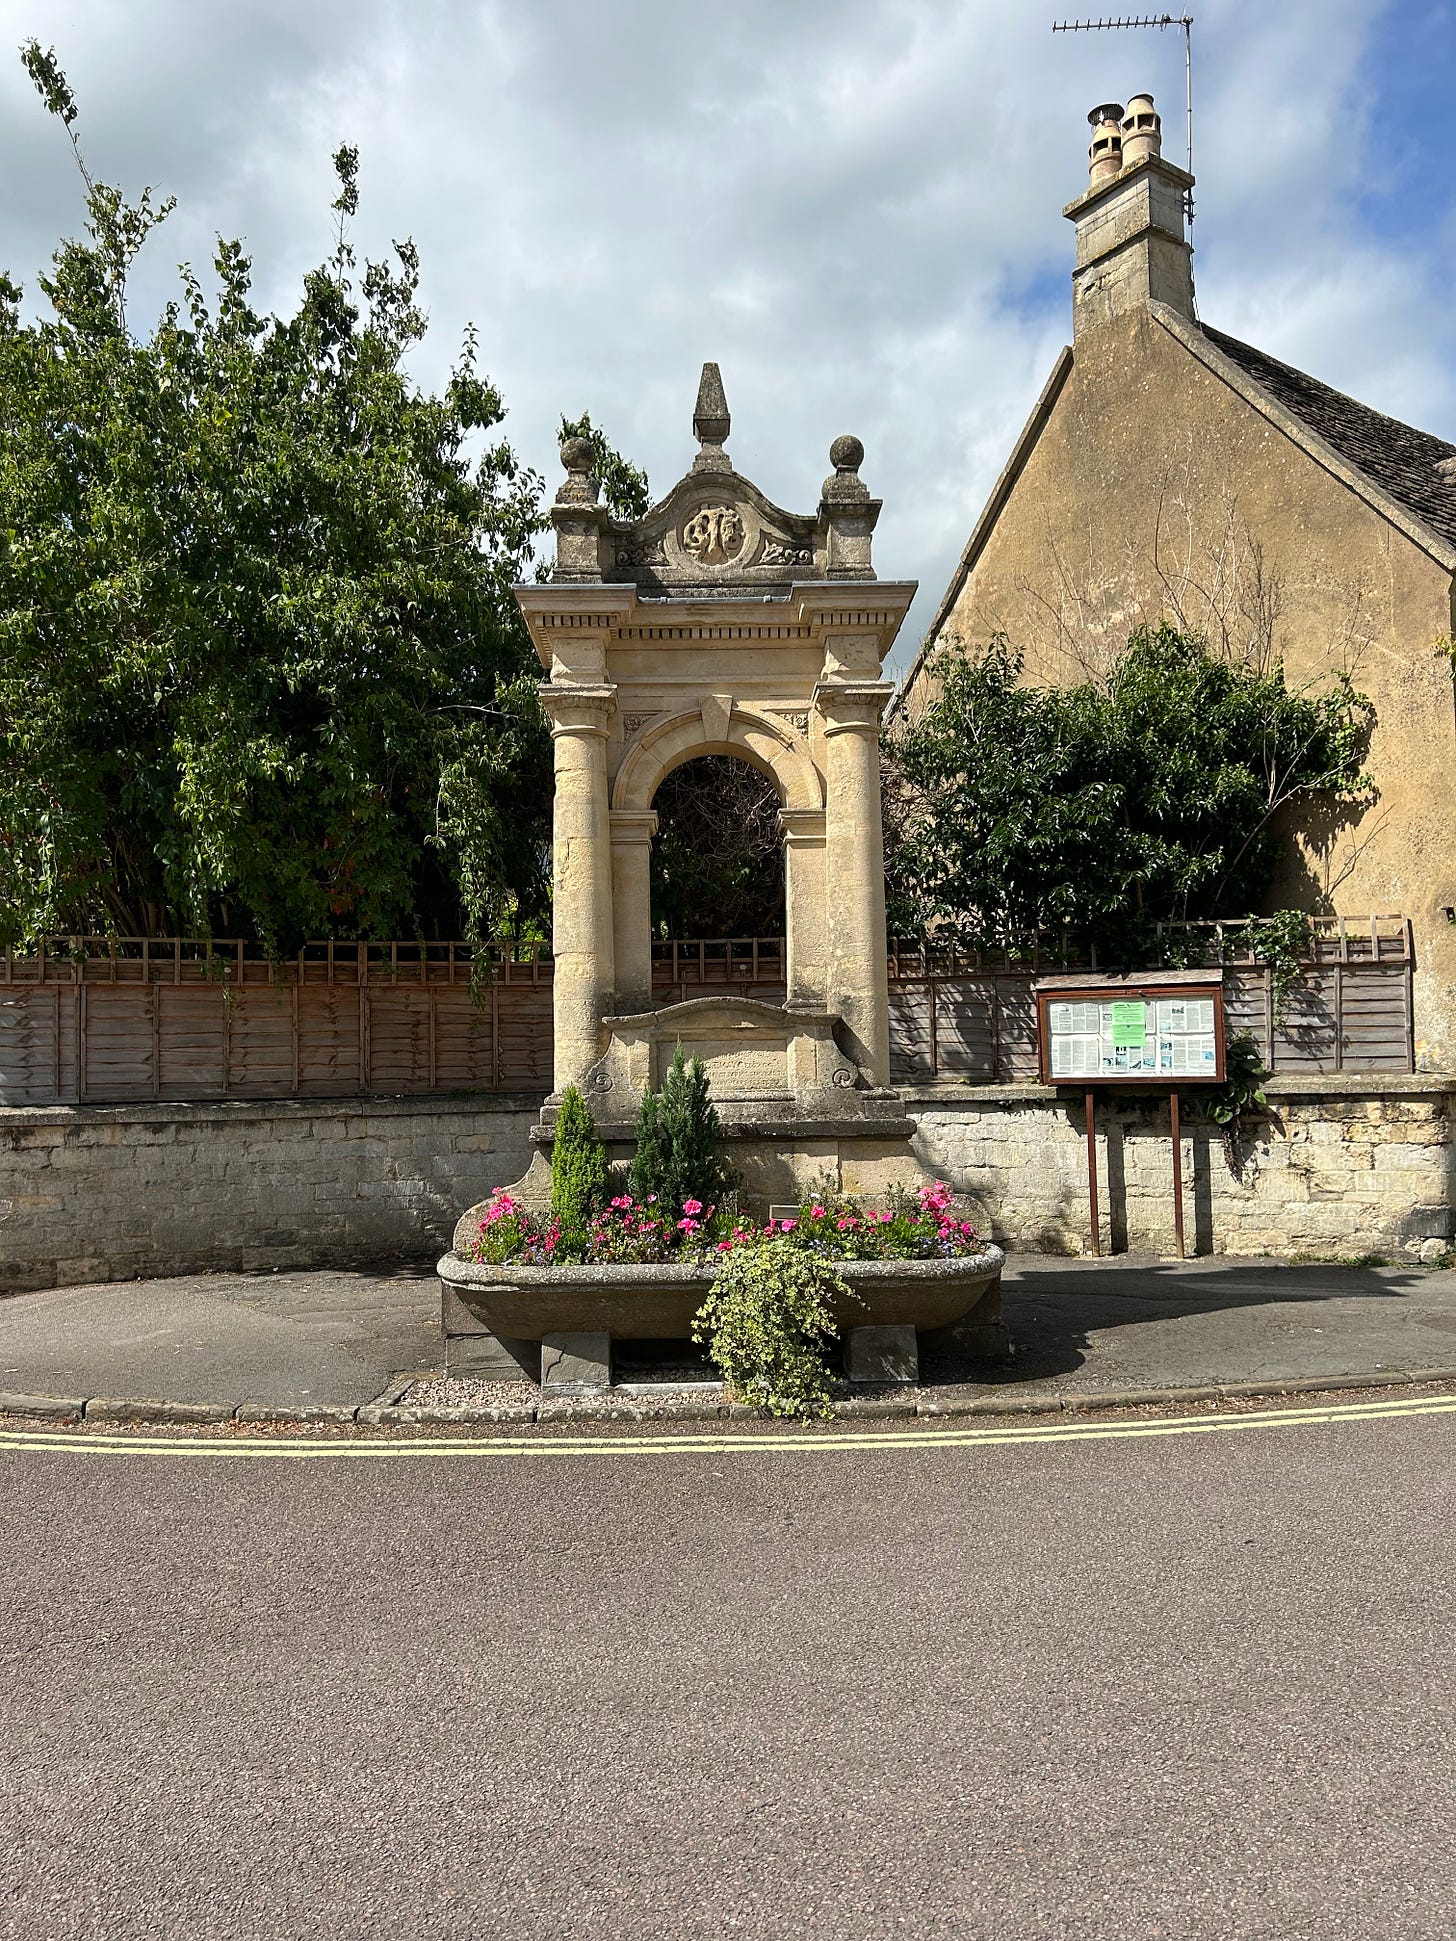 The Charles Mayo Memorial. It stands on the corner of Priory Street and High Street, Corsham. It is made of stone and has an ornate top above the two rising columns and archway. 